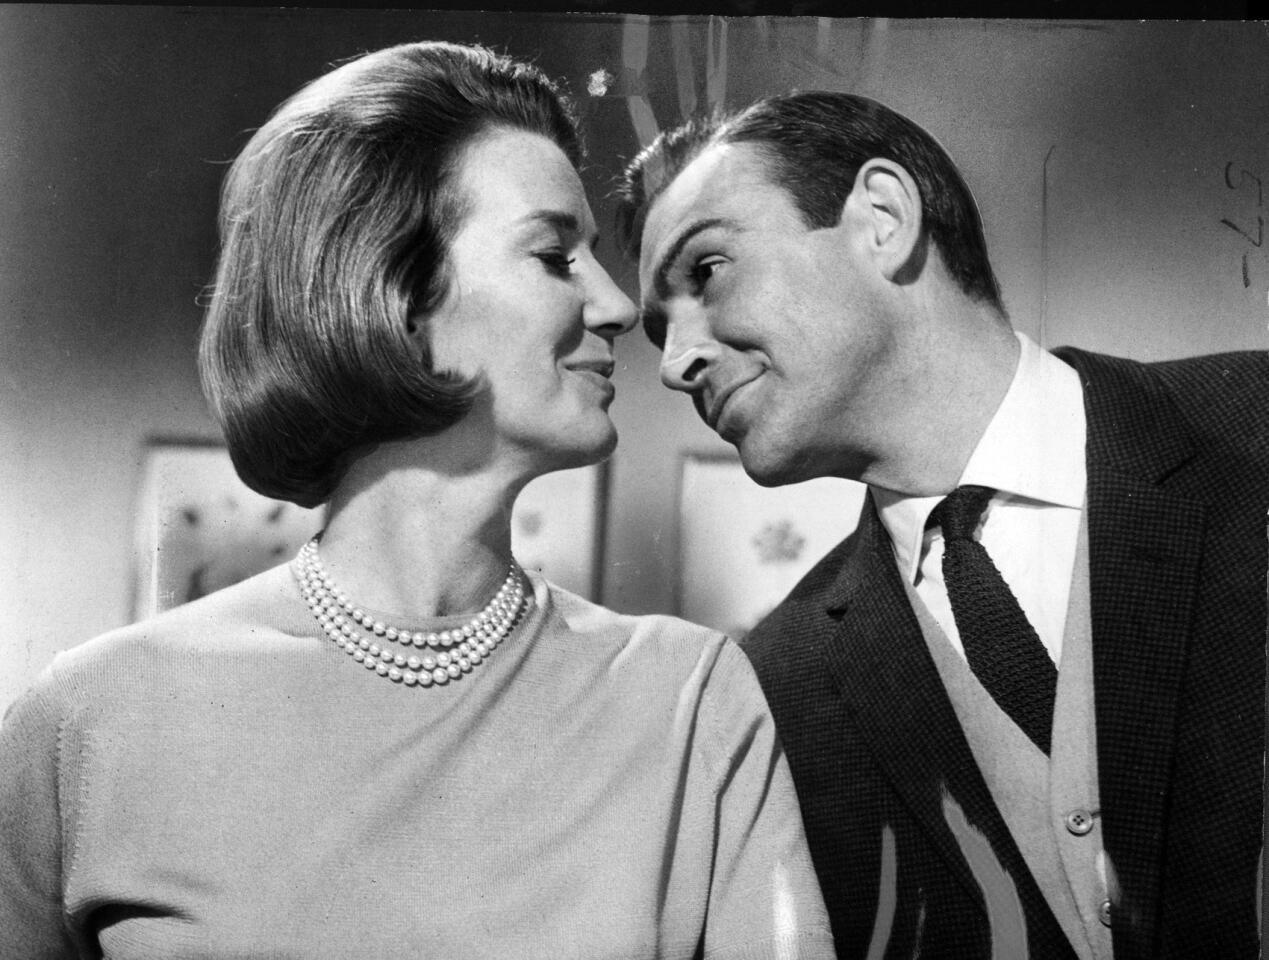 Connery's Bond pauses to flirt with Miss Moneypenny, played by Lois Maxwell, in a scene in "Goldfinger."